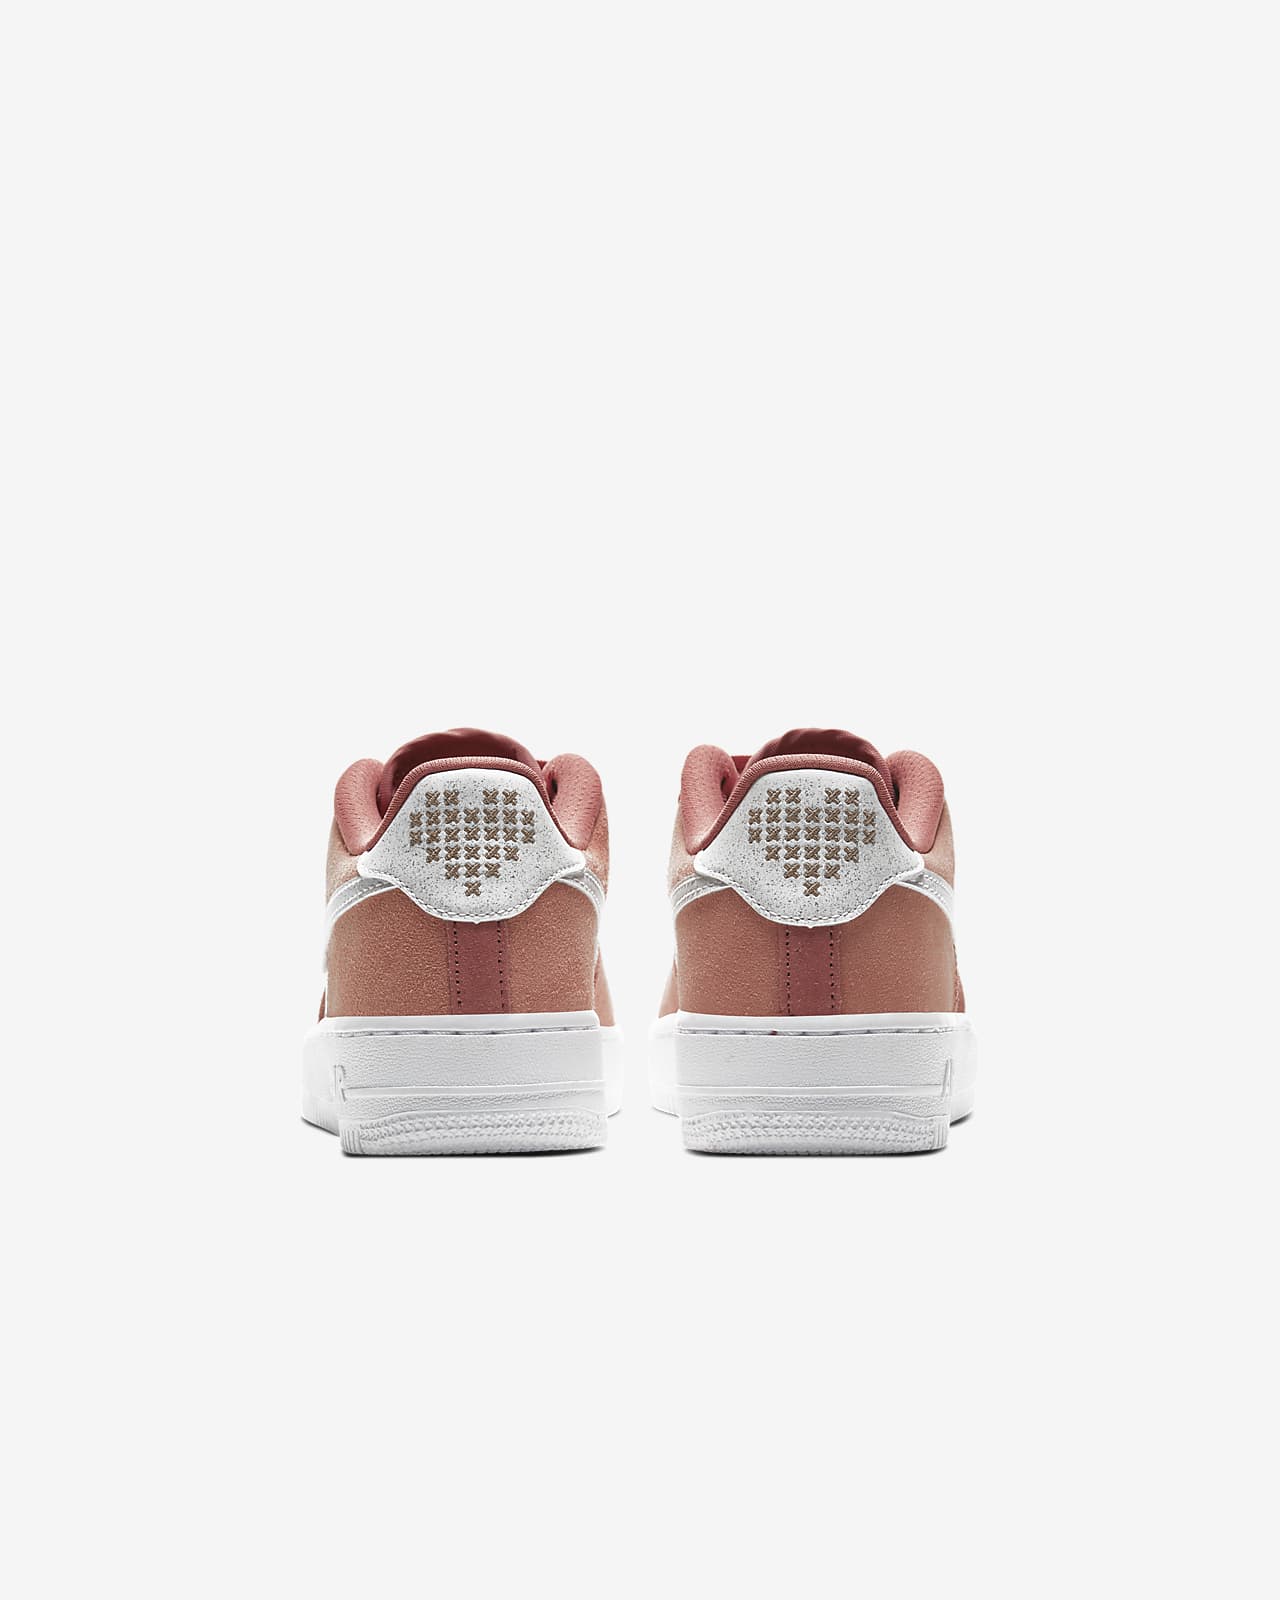 air force 1 lv8 valentine's day